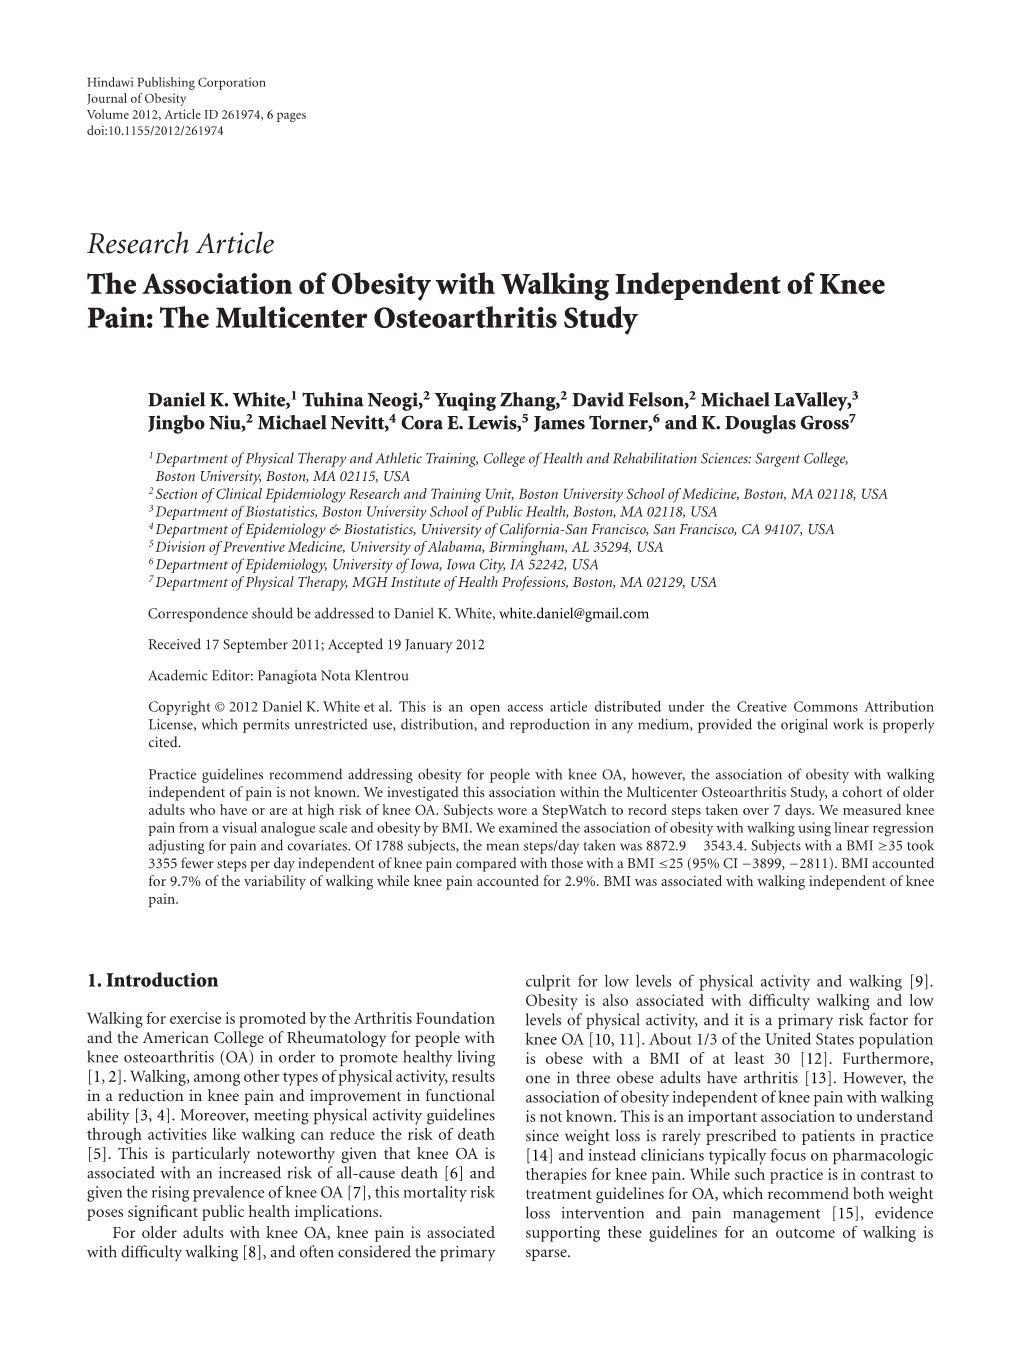 Research Article the Association of Obesity with Walking Independent of Knee Pain: the Multicenter Osteoarthritis Study